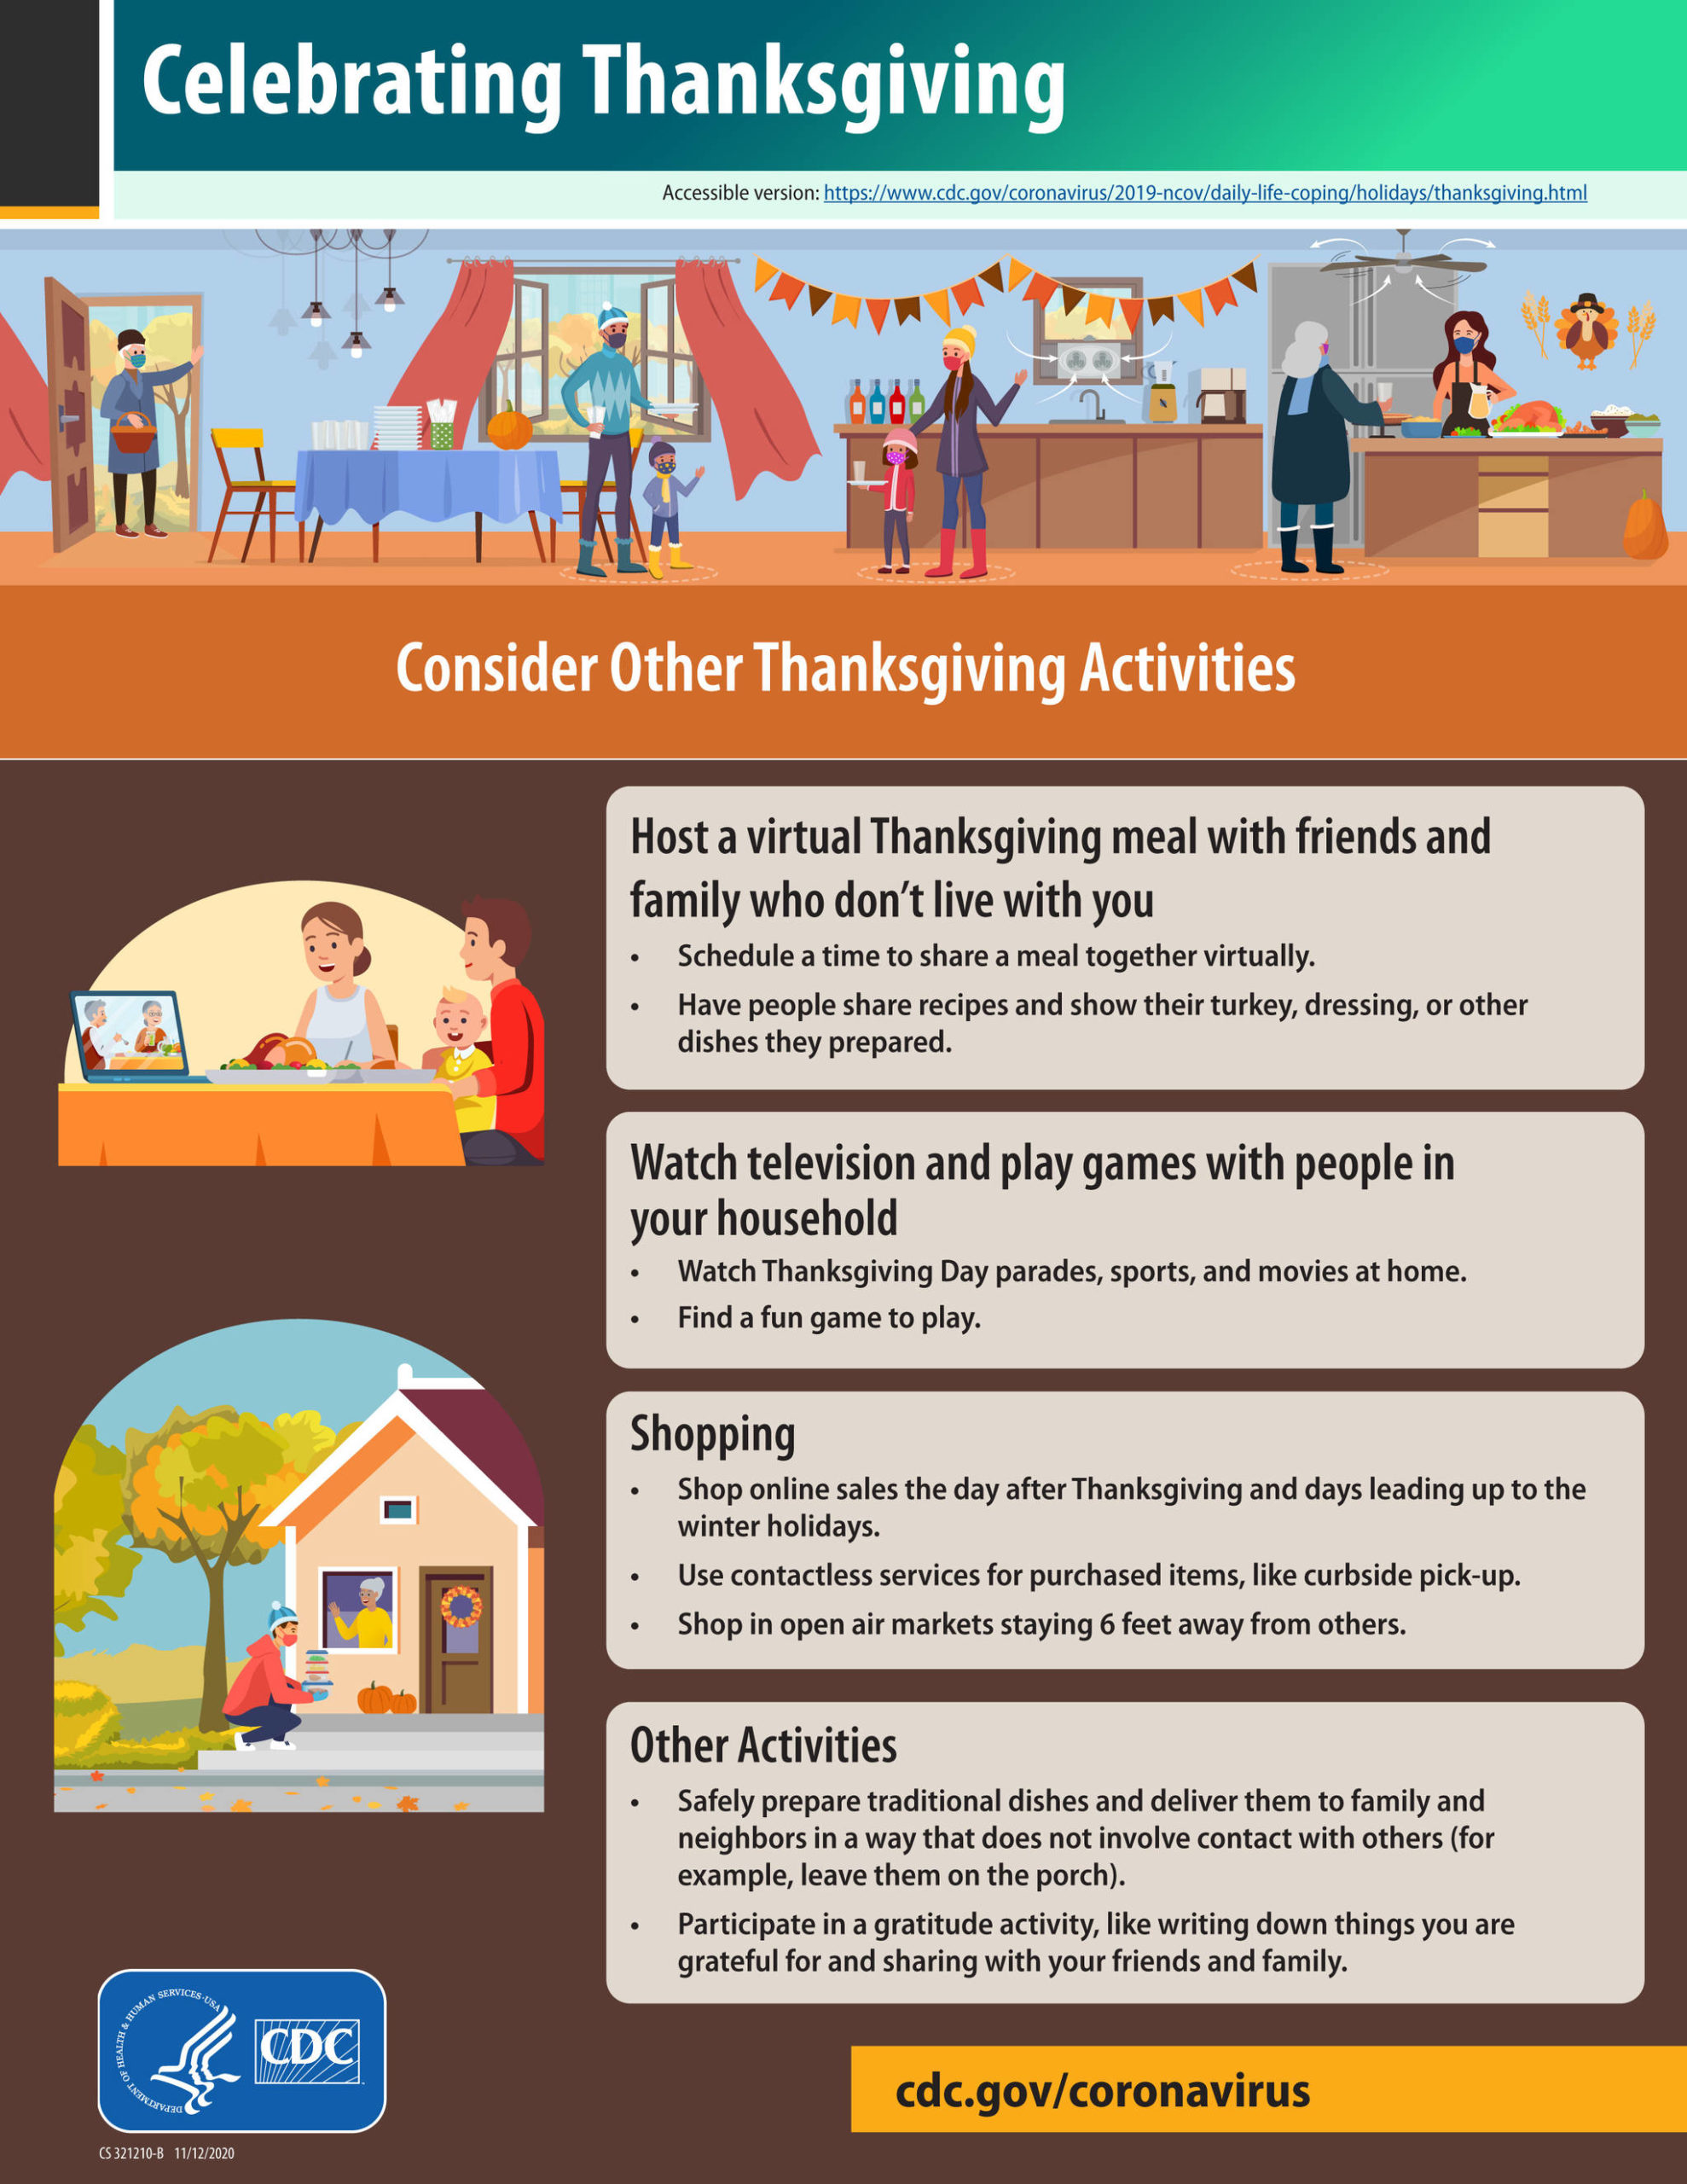 CDC
Guidance on how to celebrate Thanksgiving while mitigating the spread of COVID-19.